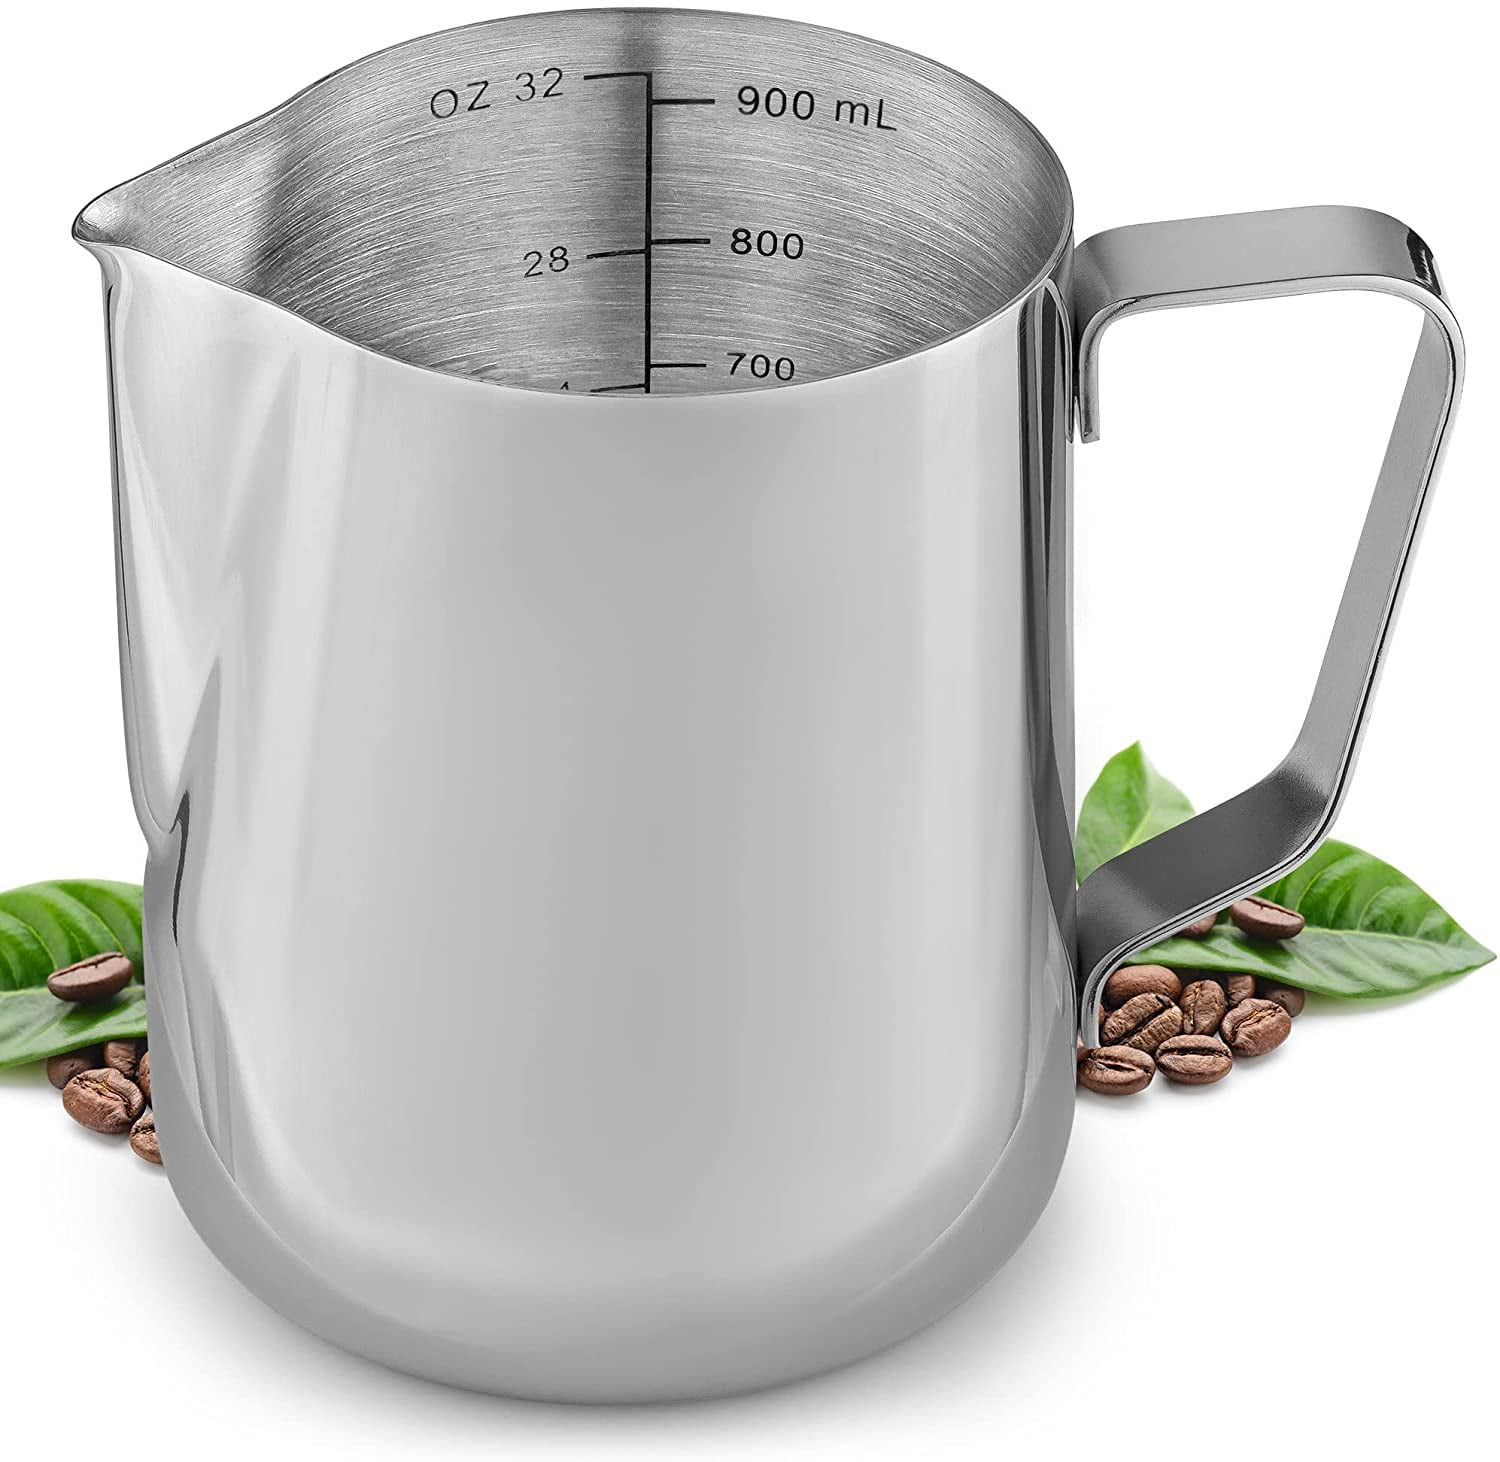 32 oz Stainless Steel Measuring Cup with Handle, Metal Pitcher